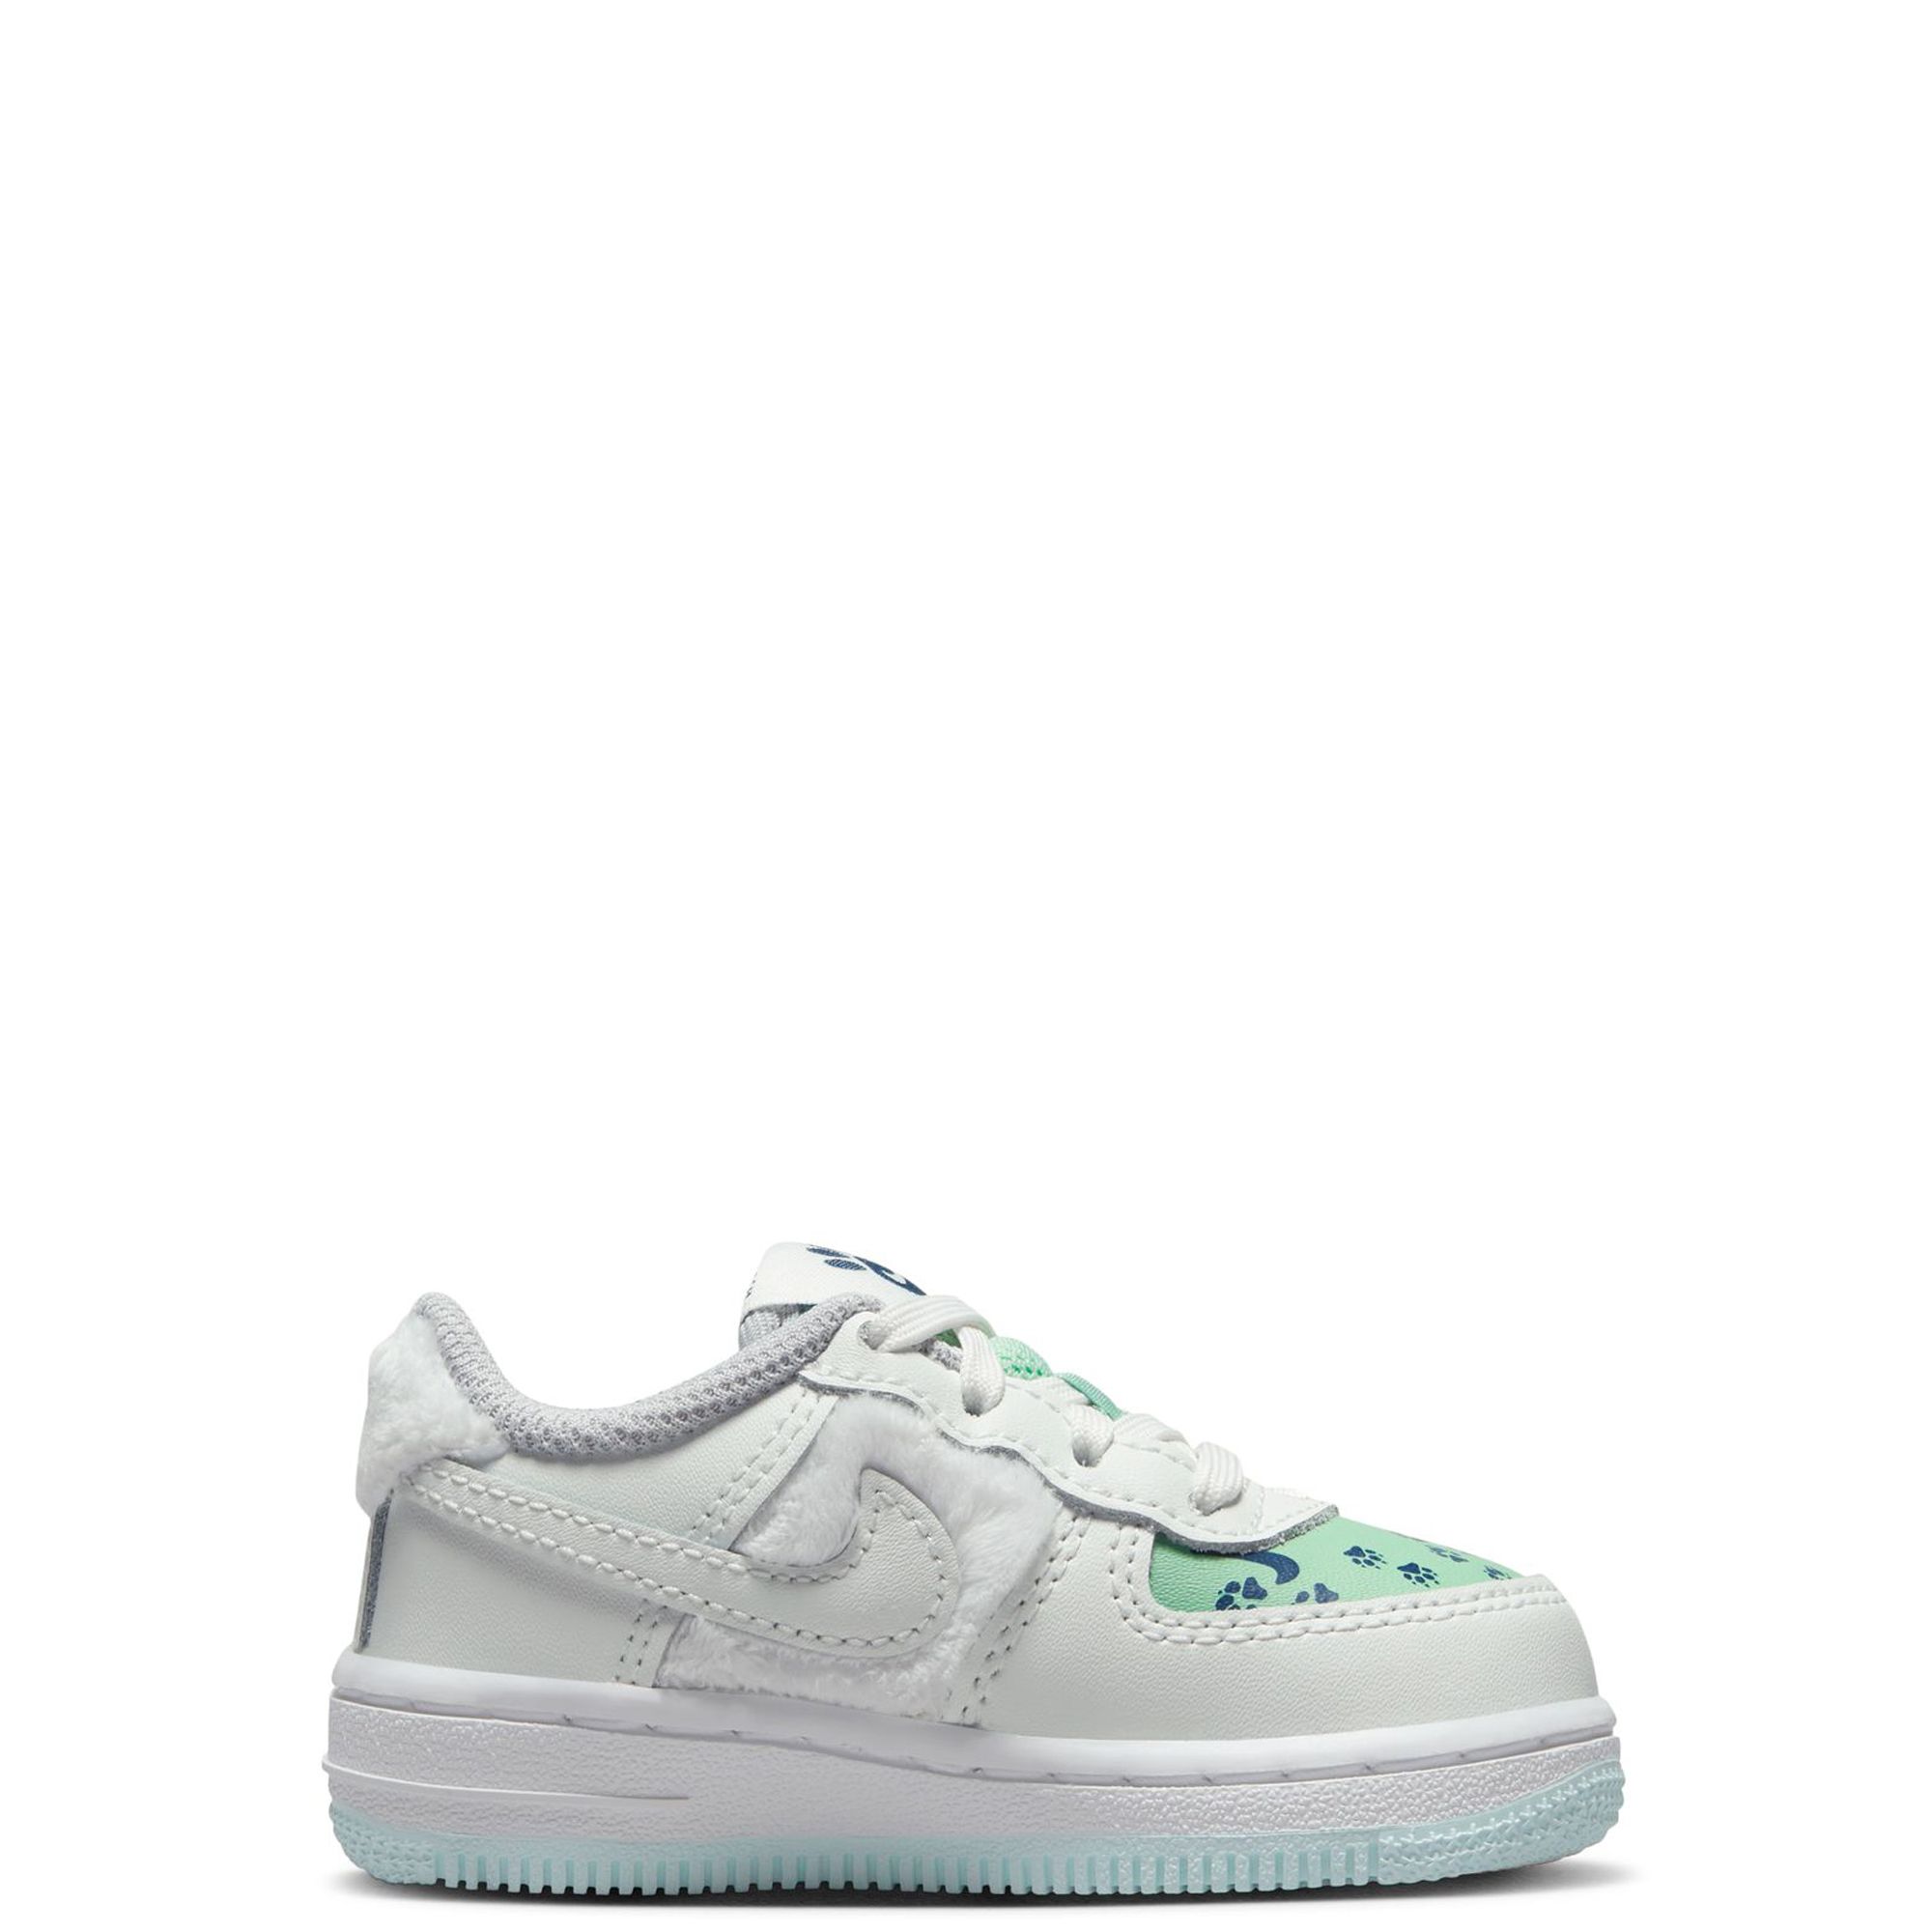 Nike Force 1 LV8 2(TD) Toddlers' Shoes White-Wolf Grey-Black